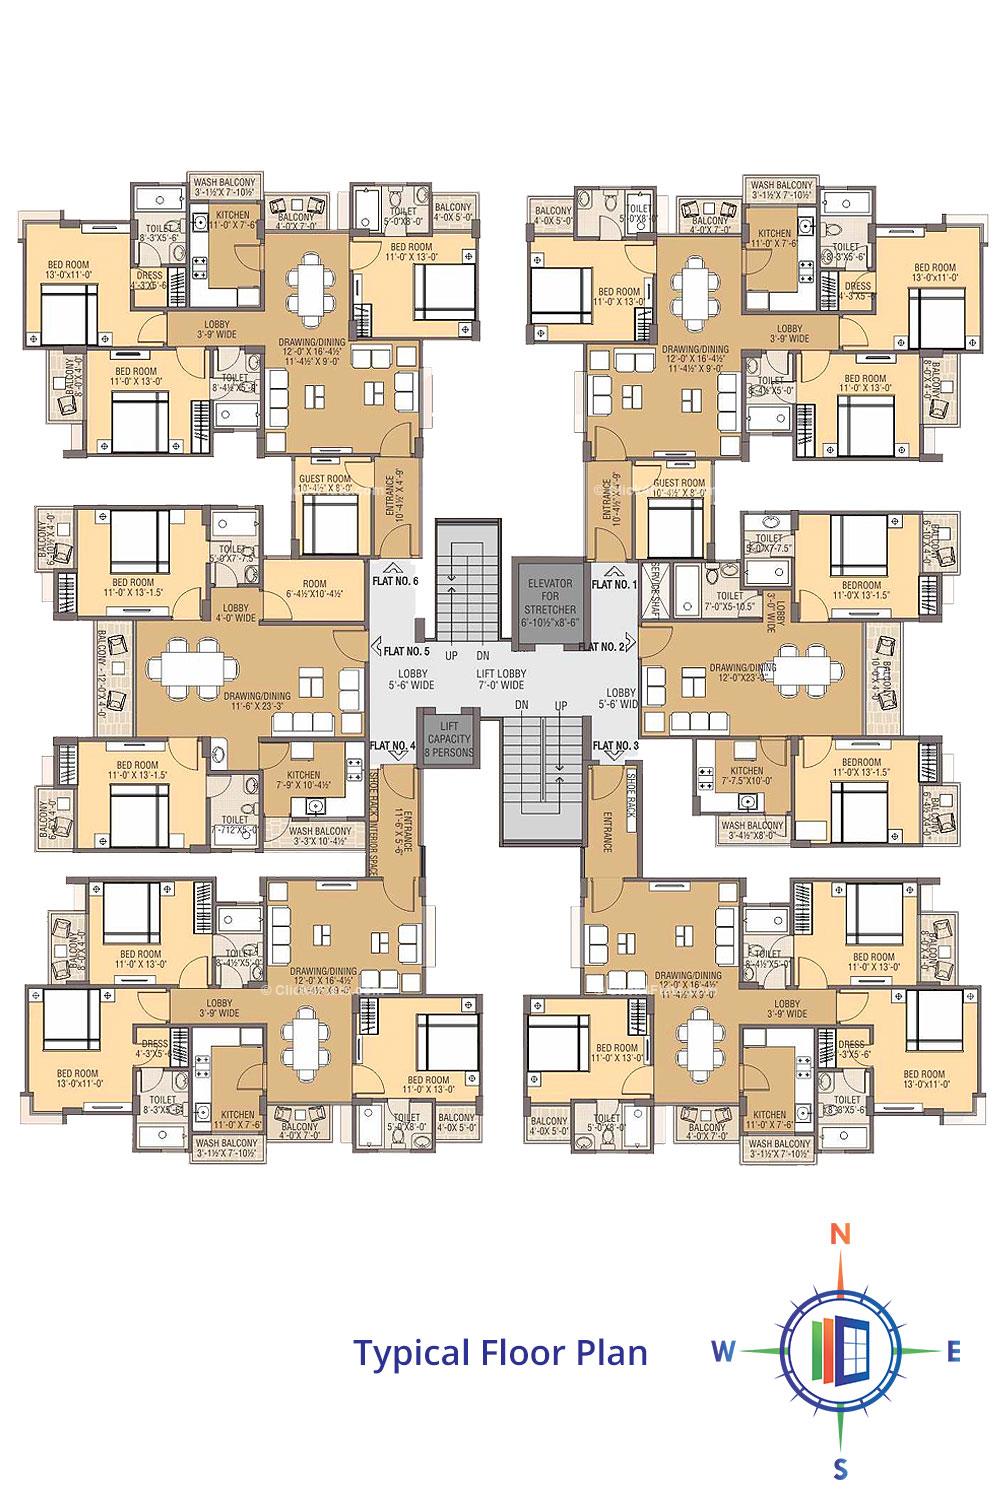 South Court Typical Floor Plan